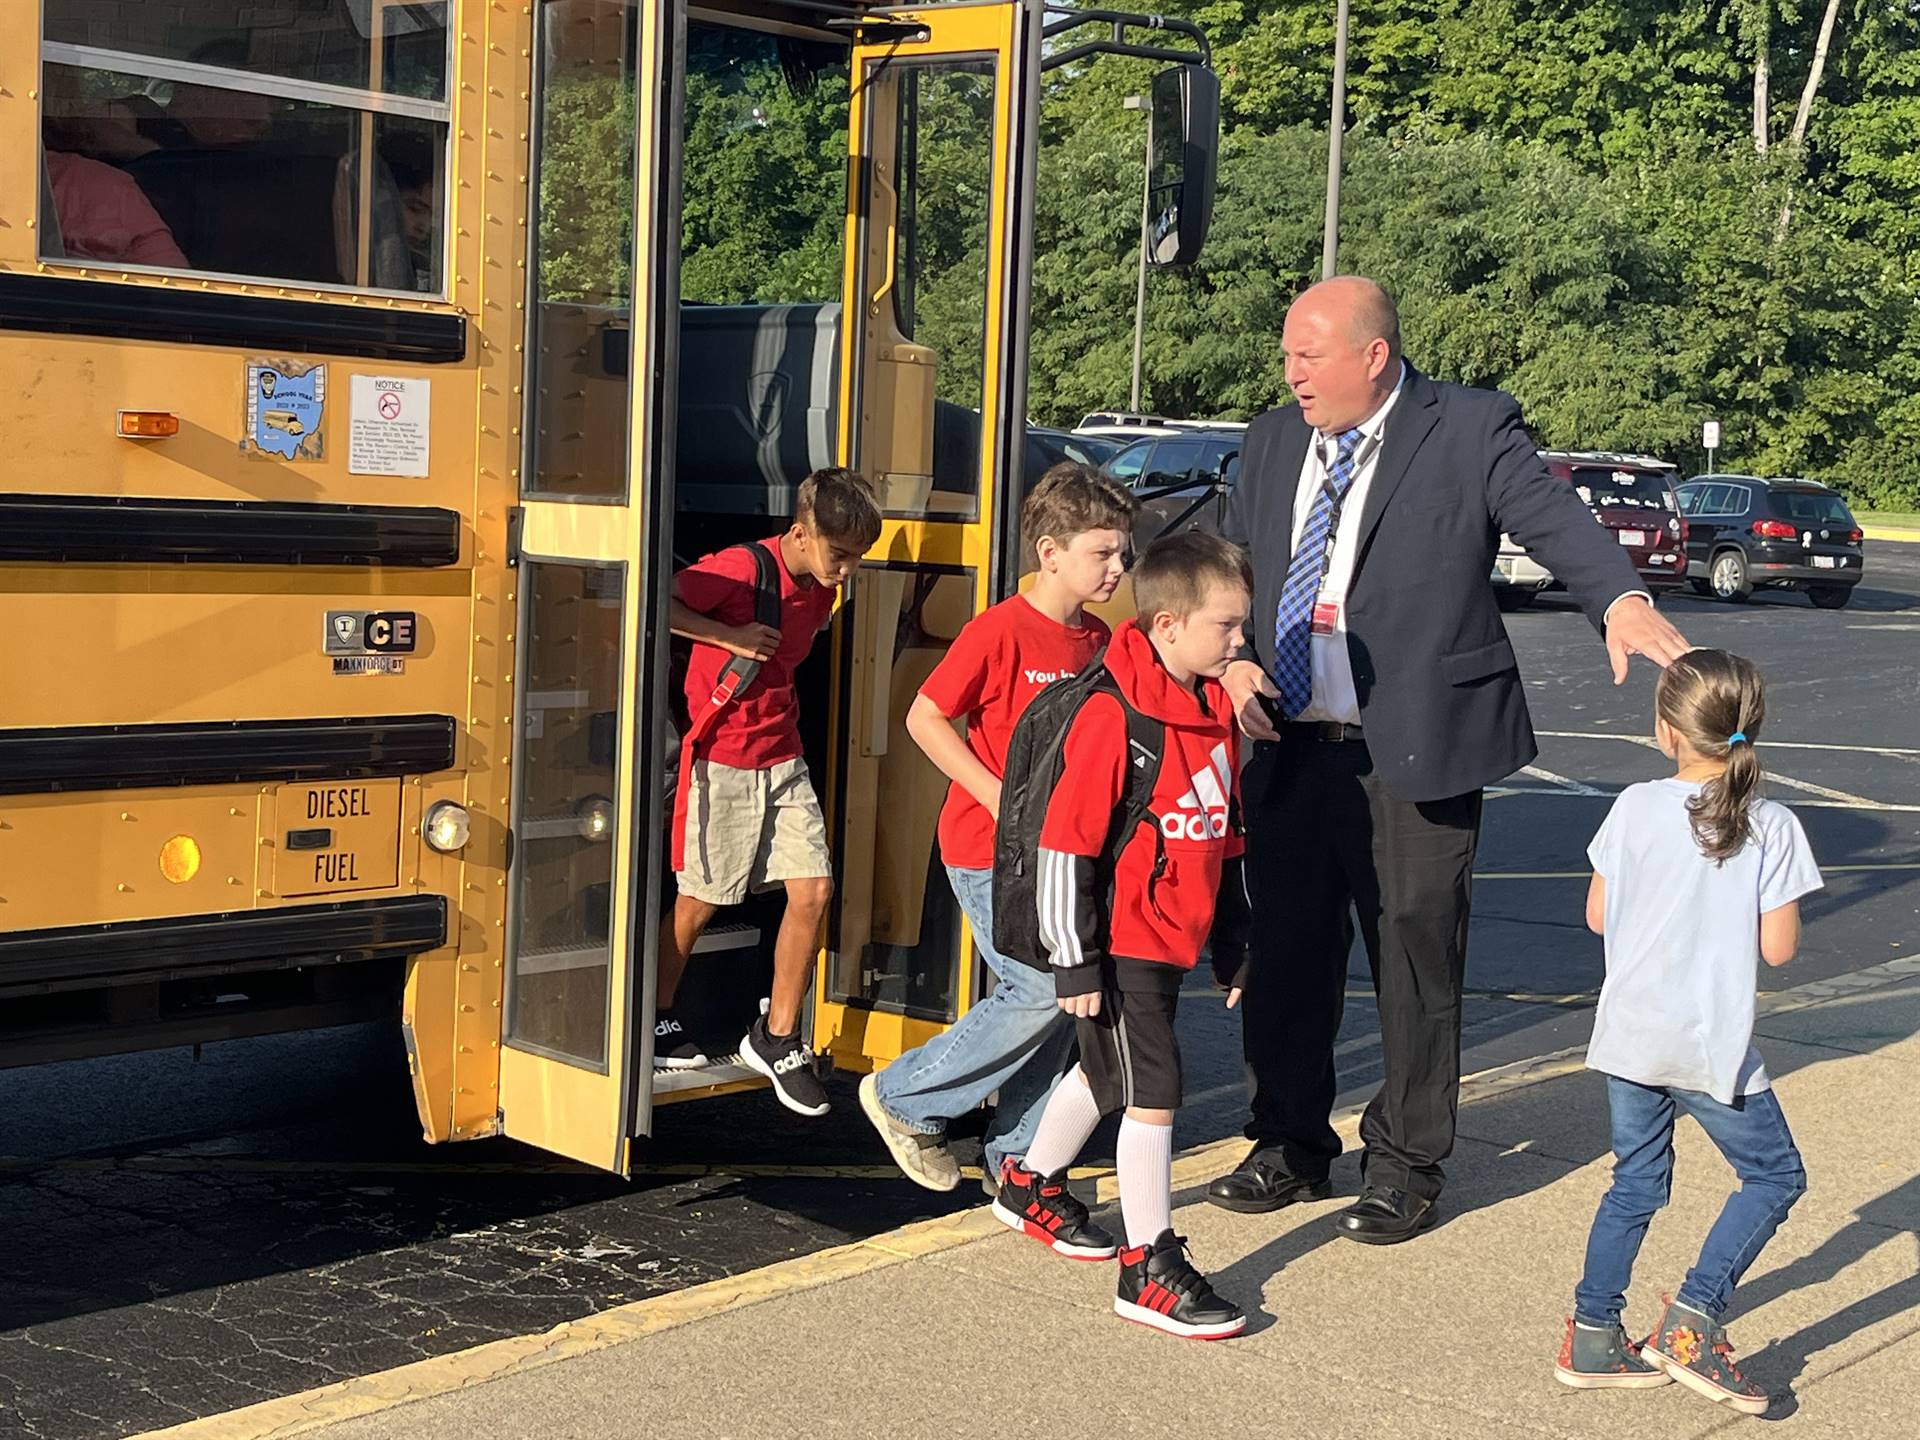 Mr Roach helping students off of the bus